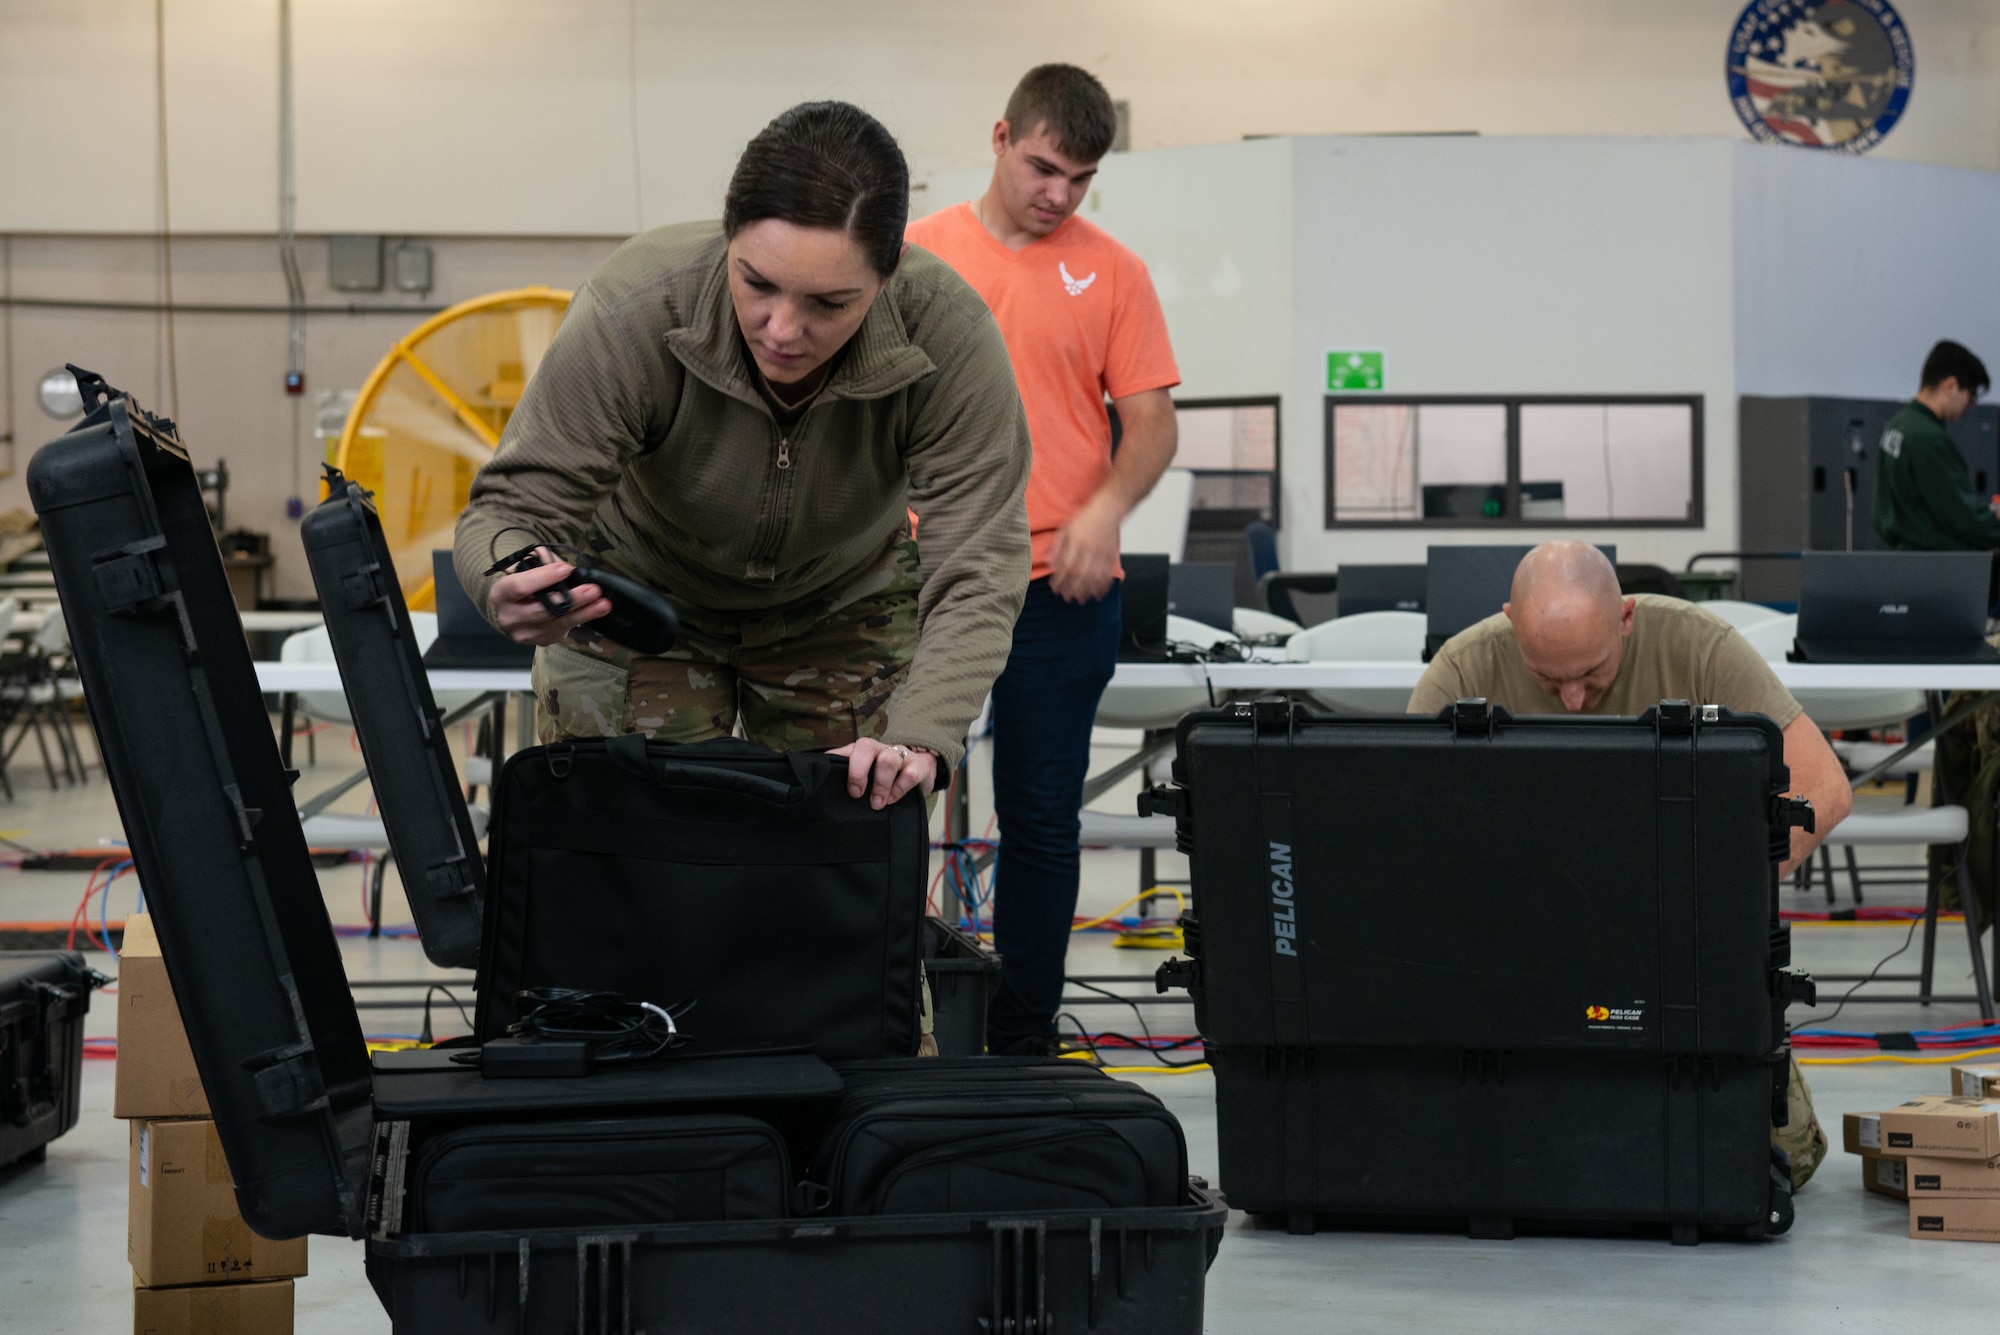 U.S. Air Force Airmen assigned to the 23rd Wing unload equipment while setting up a Wing Operations Center for use during the Mosaic Tiger 24-1 exercise Nov. 10, 2023, at Moody Air Force Base, Georgia. The WOC served as a command and control node that coordinated action between Moody; Grand Bay Bombing and Gunnery Range, Georgia; MacDill AFB, Florida; and Avon Park Air Force Range, Florida, during the exercise. Mosaic Tiger 24-1 challenged communications Airmen to quickly set up, break down and move the WOC with minimal disruption to operations. (U.S. Air Force photo by Staff Sgt. John Crampton)